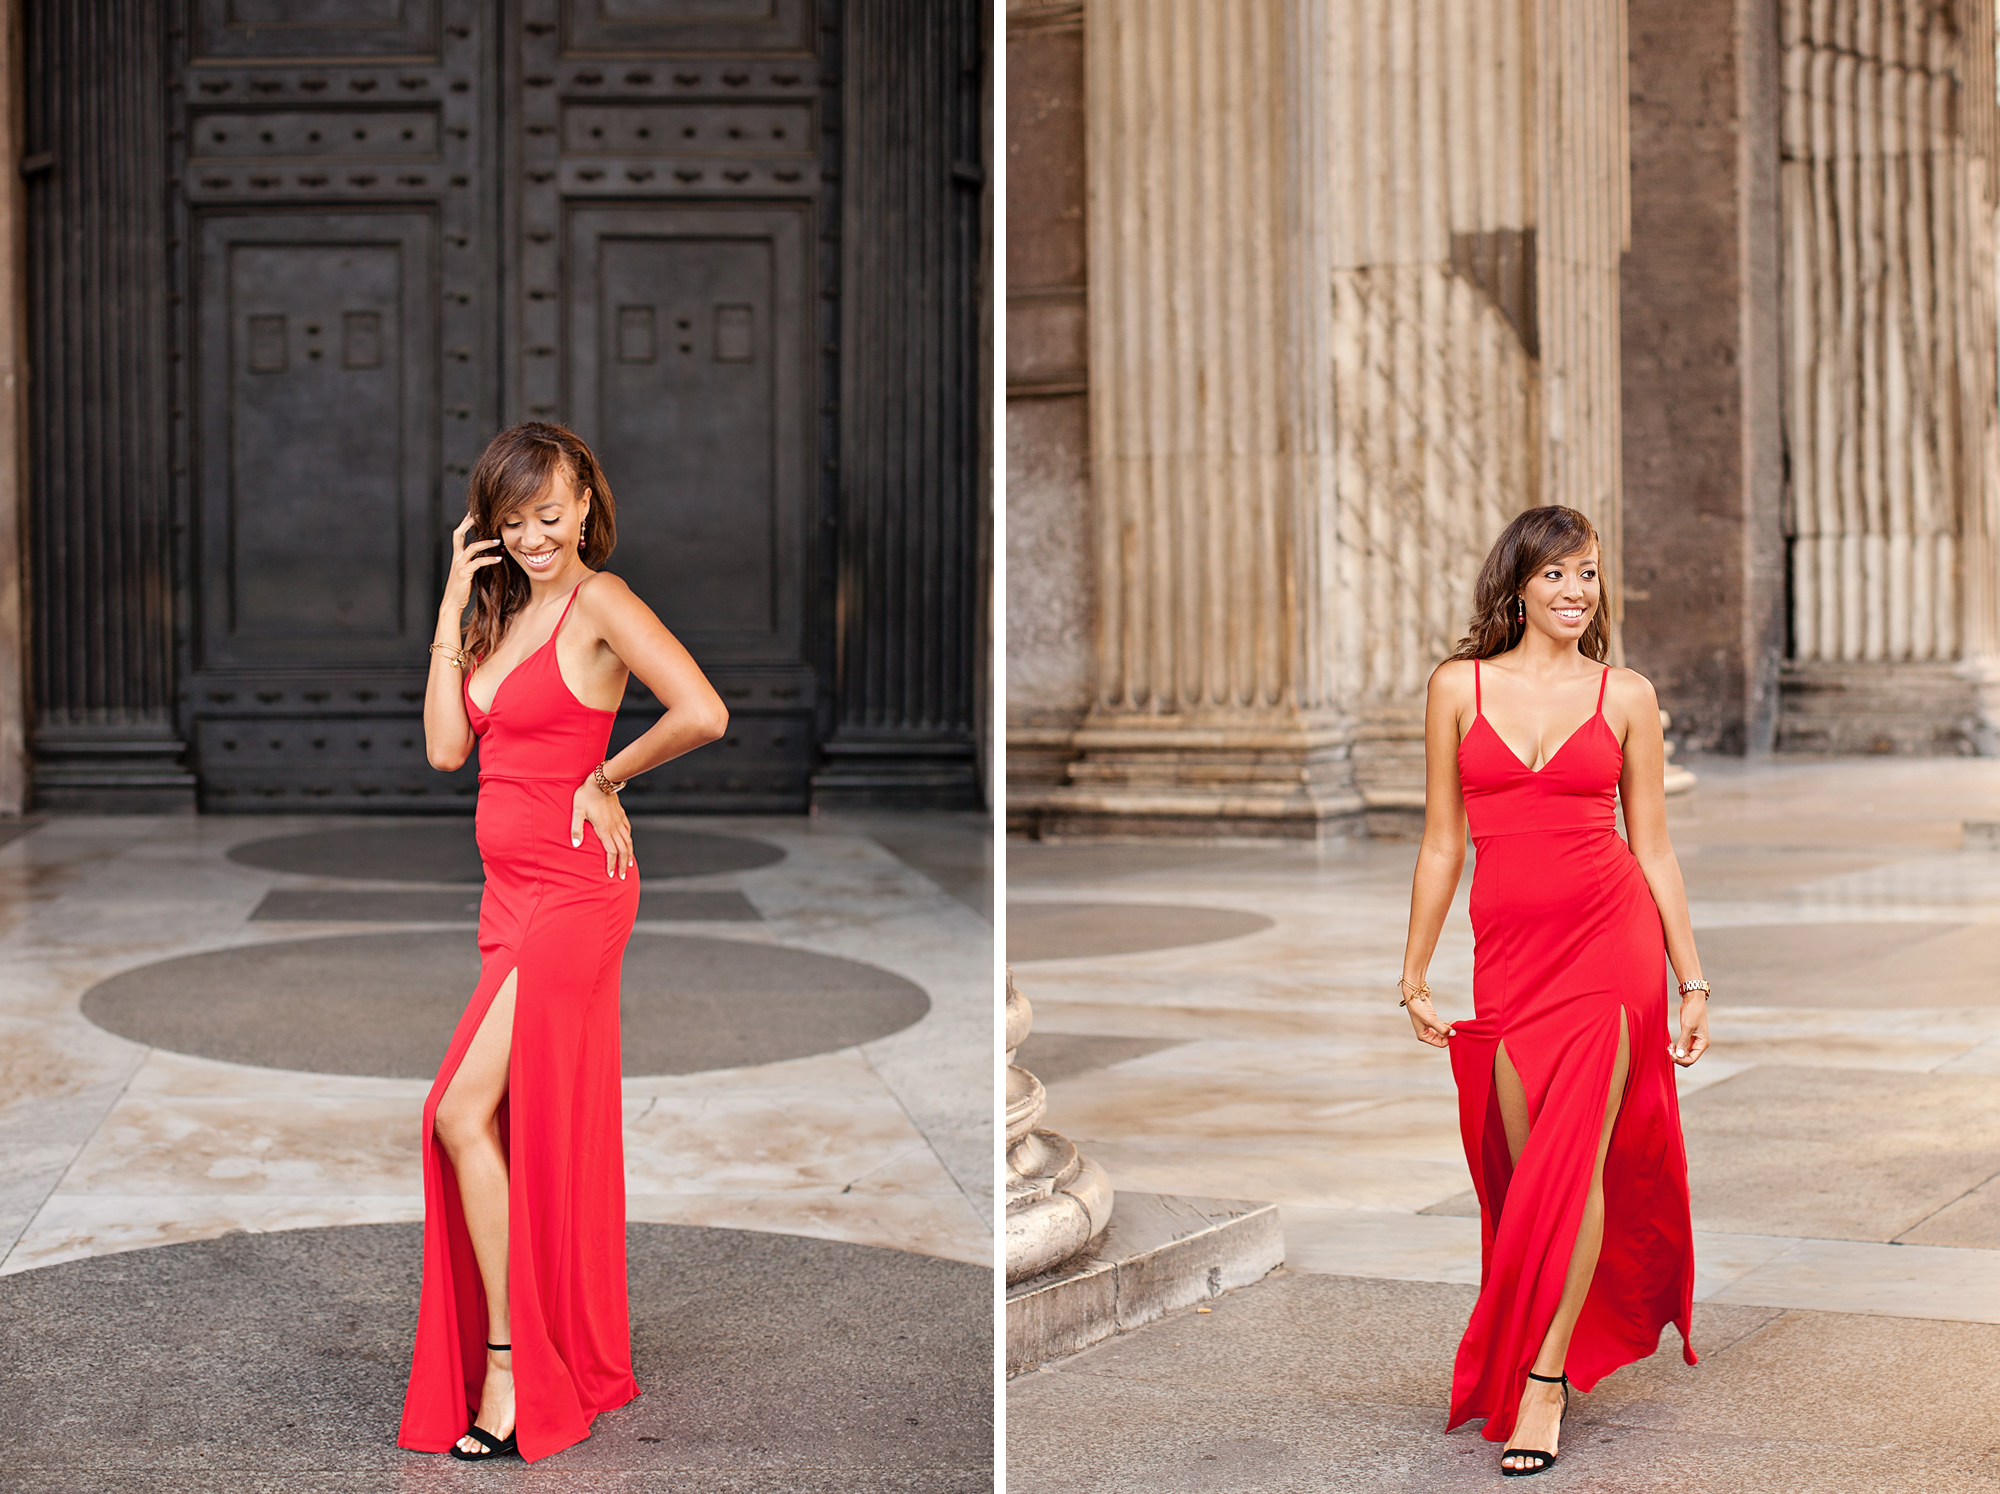 Honeymoon, vacation, family, engagement, maternity, love story individual and solo photoshoots in Rome, Italy by photographer Tricia Anne Photography | Rome Photographer, vacation, tripadvisor, instagram, fun, married, love, story, photography, session, photoshoot, wedding photographer, vacation photographer, engagement photo, honeymoon photoshoot, rome honeymoon, rome wedding, Pantheon, honeymoon photographer rome, Rome Solo Photo shoot, Rome Photography, Trevi Fountain, Solo trip to Rome, What to do in Rome, Solo traveler, Colosseum photo shoot